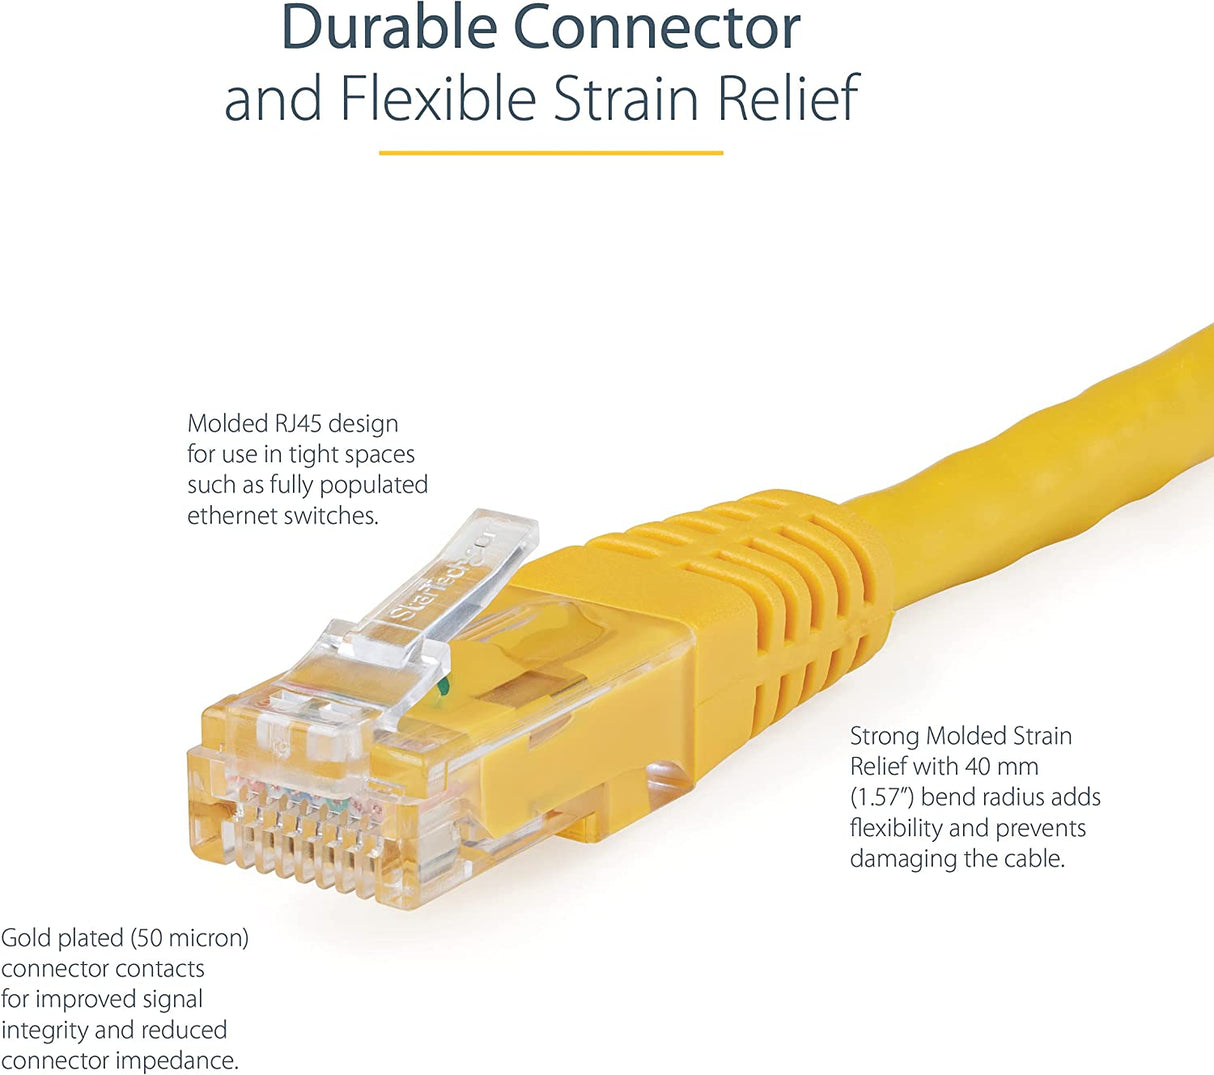 StarTech.com 20ft CAT6 Ethernet Cable - Yellow CAT 6 Gigabit Ethernet Wire -650MHz 100W PoE++ RJ45 UTP Molded Category 6 Network/Patch Cord w/Strain Relief/Fluke Tested UL/TIA Certified (C6PATCH20YL) Yellow 20 ft / 6 m 1 Pack